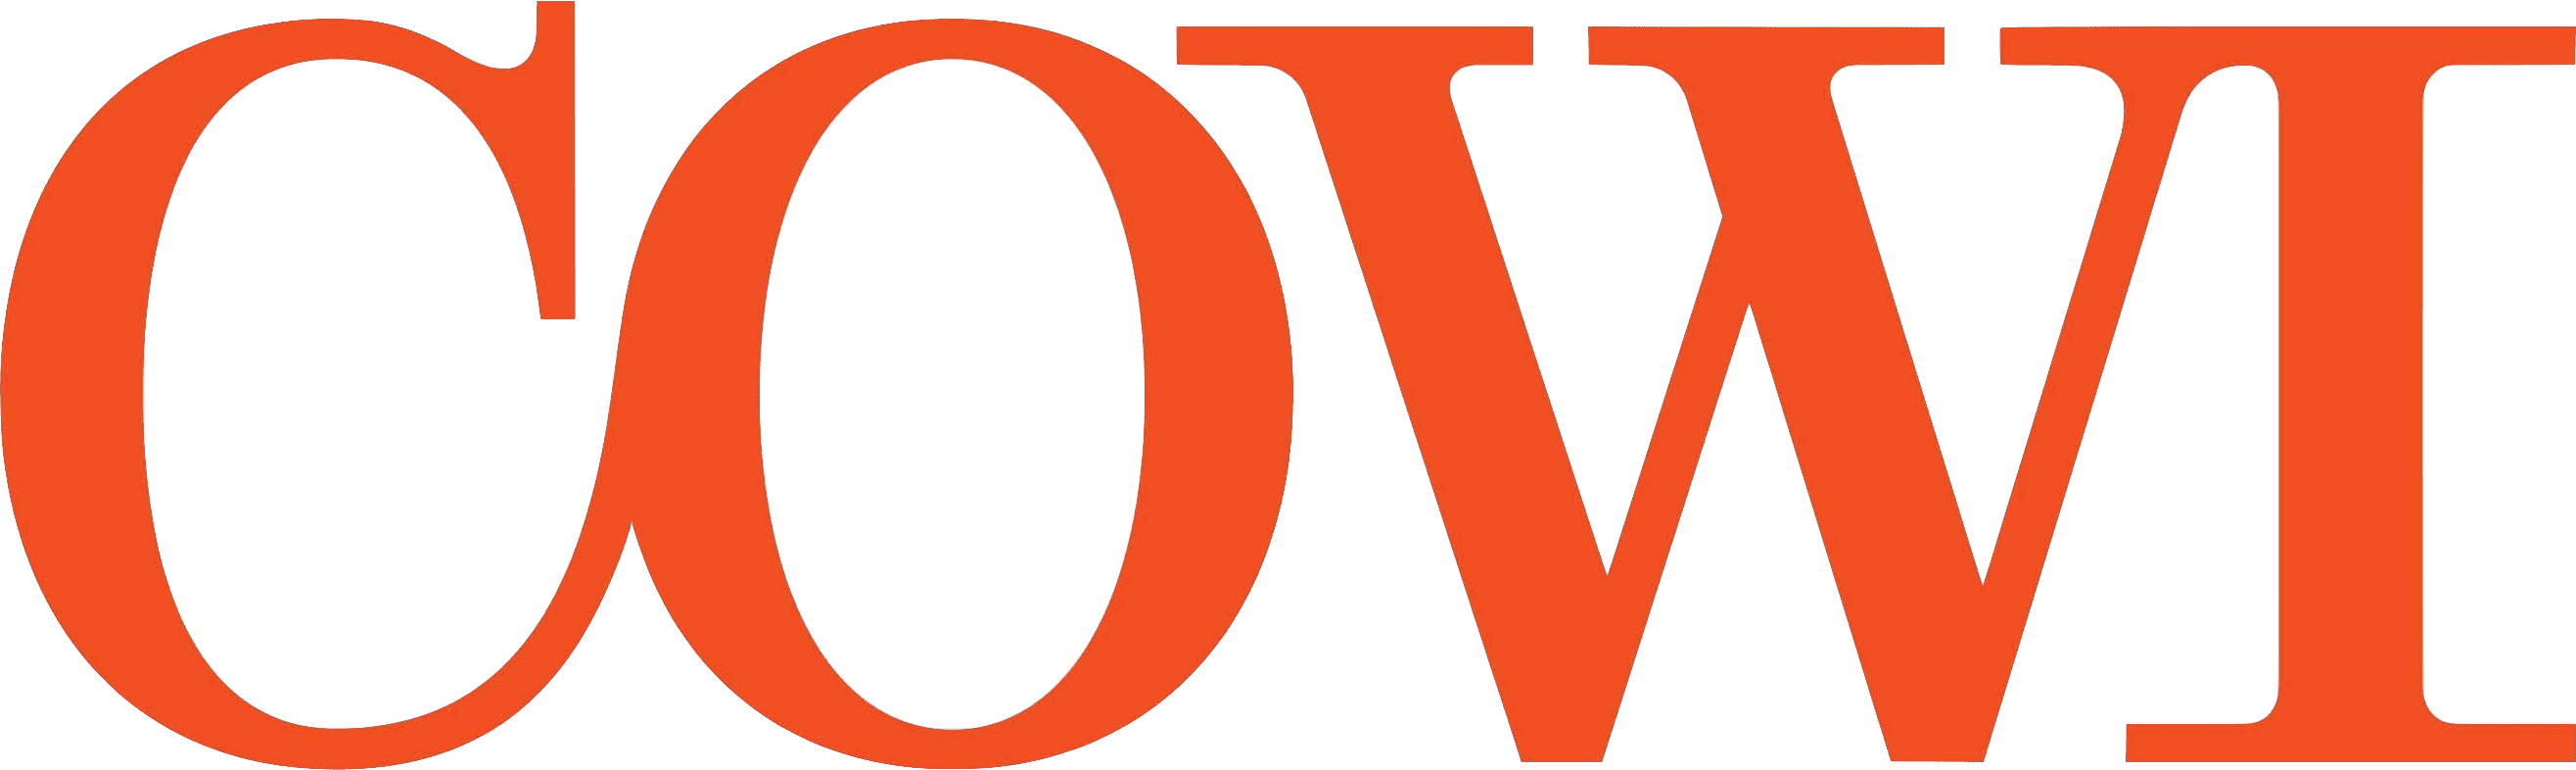 cowi logo – Assembly Voting